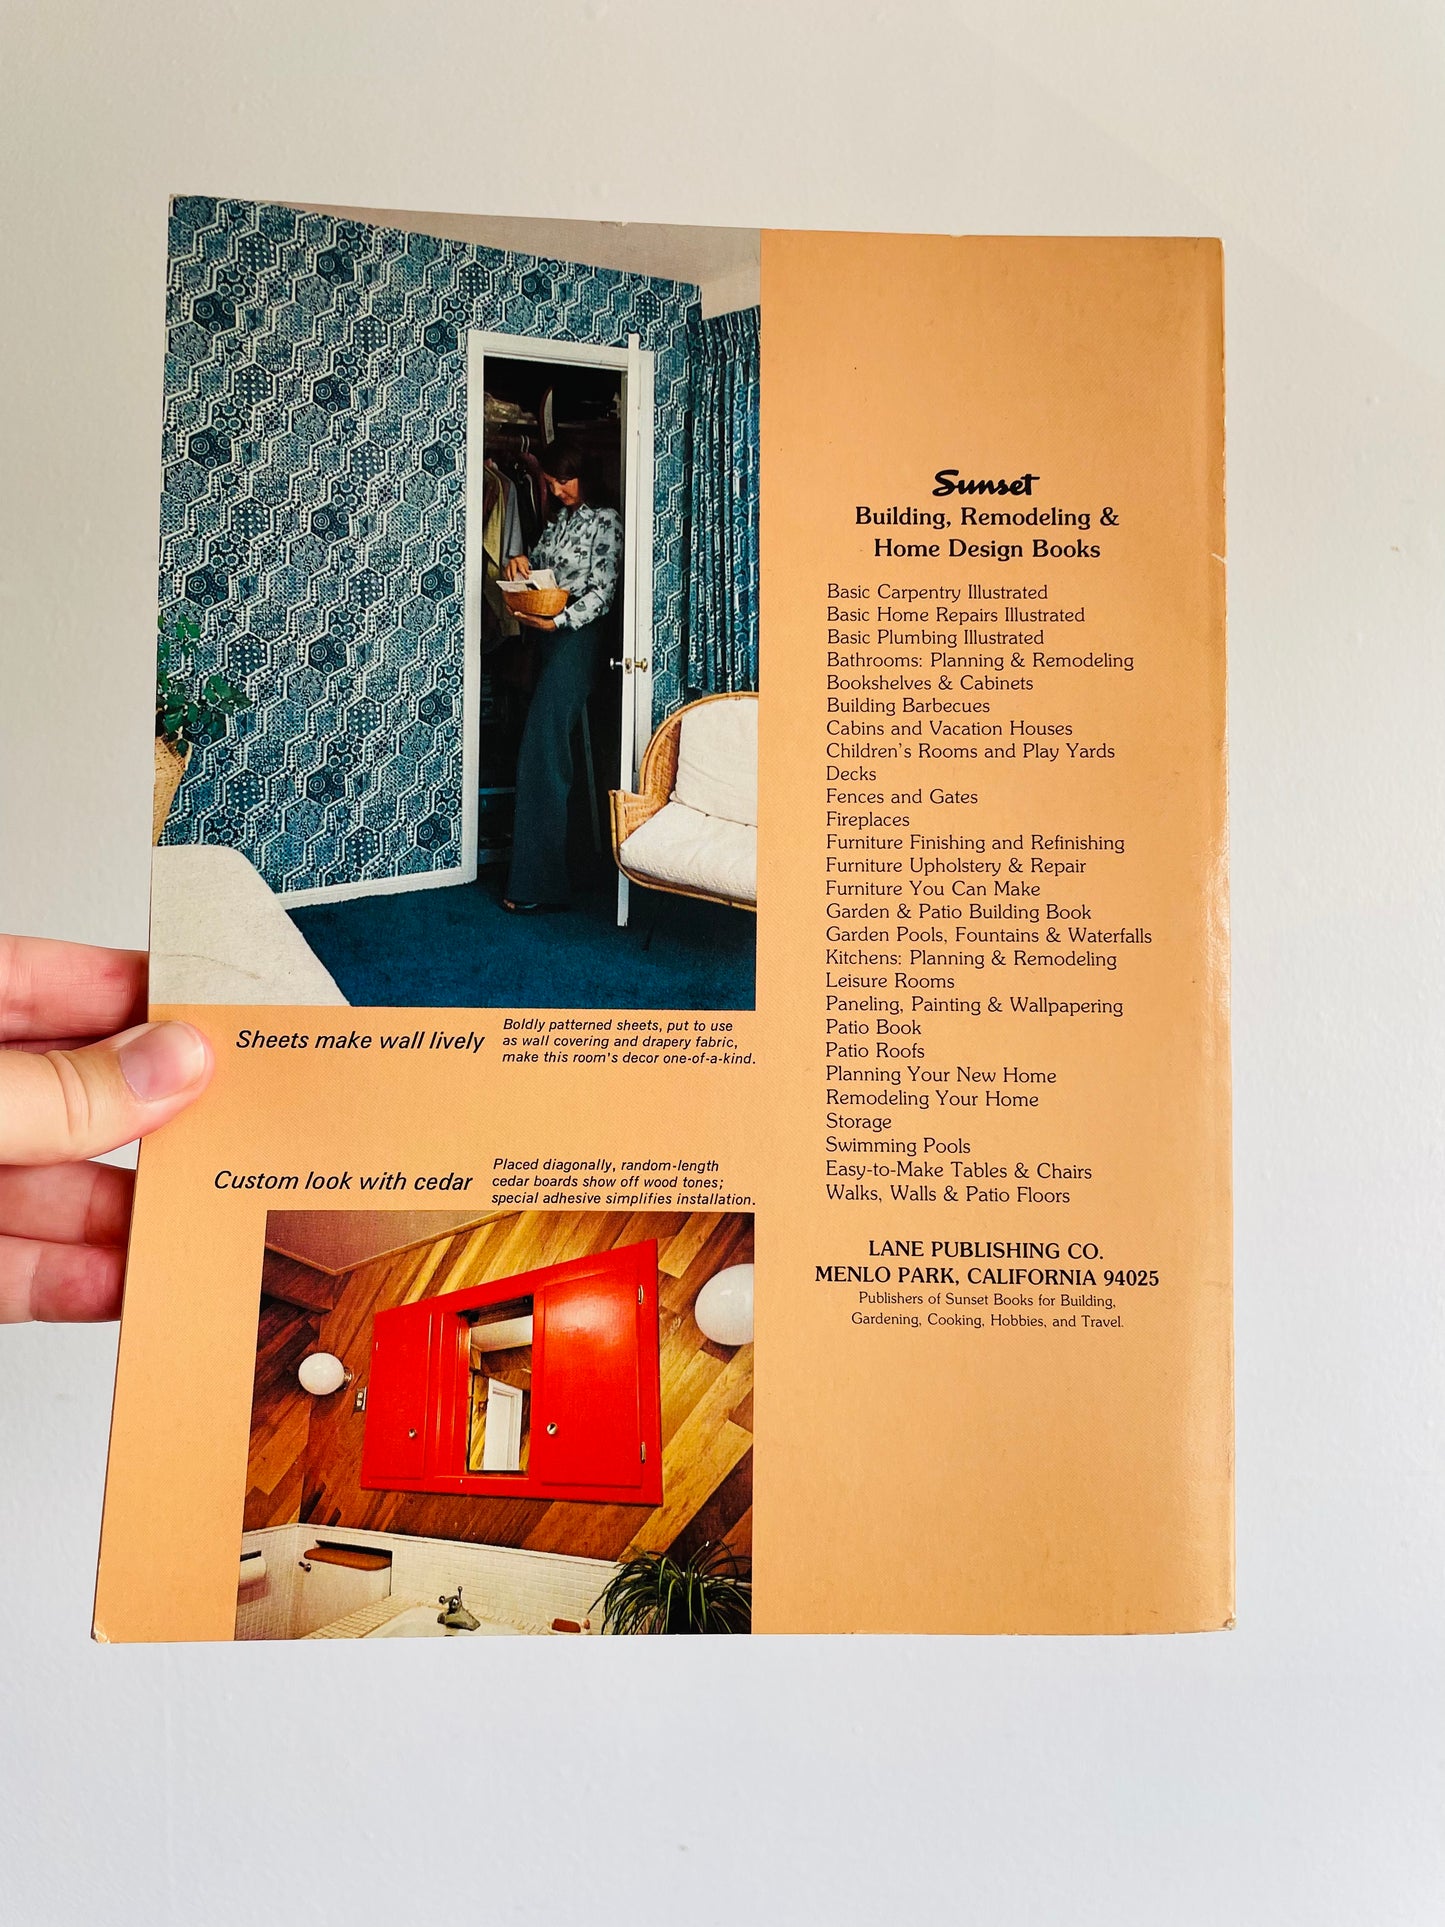 Sunset Home Remodeling Guide to Paneling, Painting, & Wallpapering Book (1976)